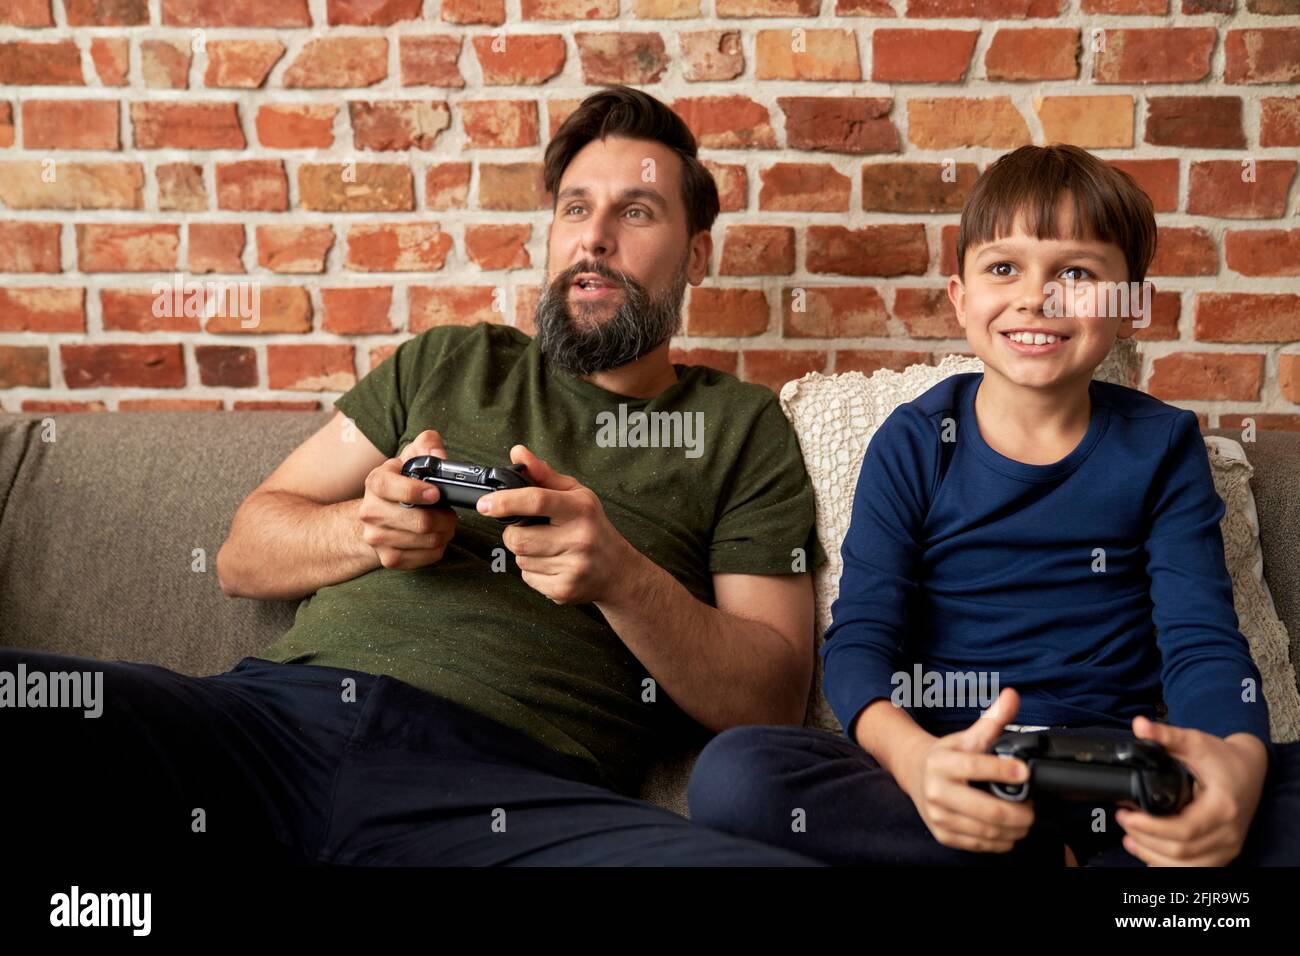 Happy father and son playing video game on couch Stock Photo